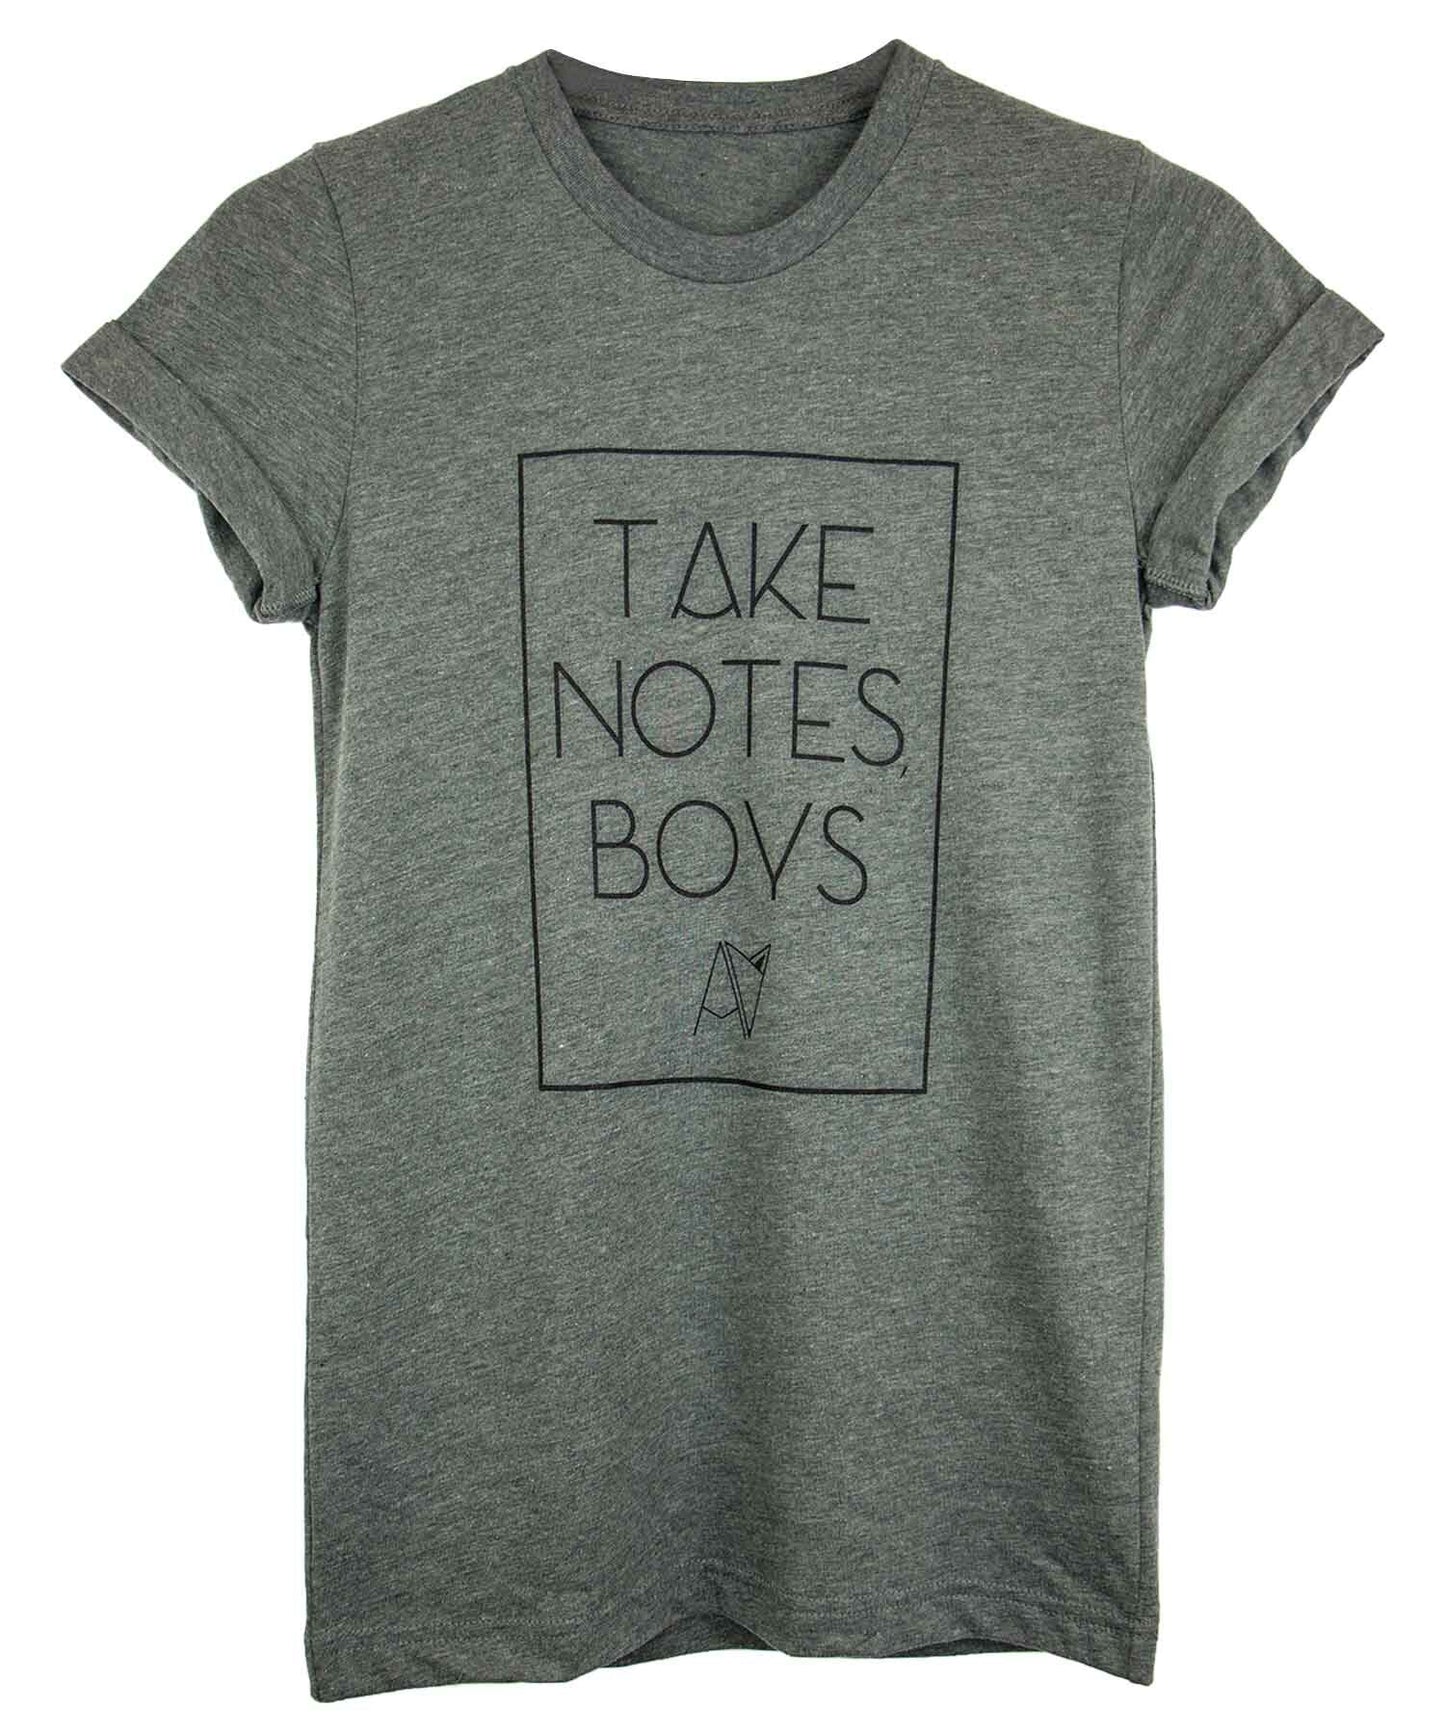 Grey crew neck "take notes boys" t-shirt by Androgynous Fox. 